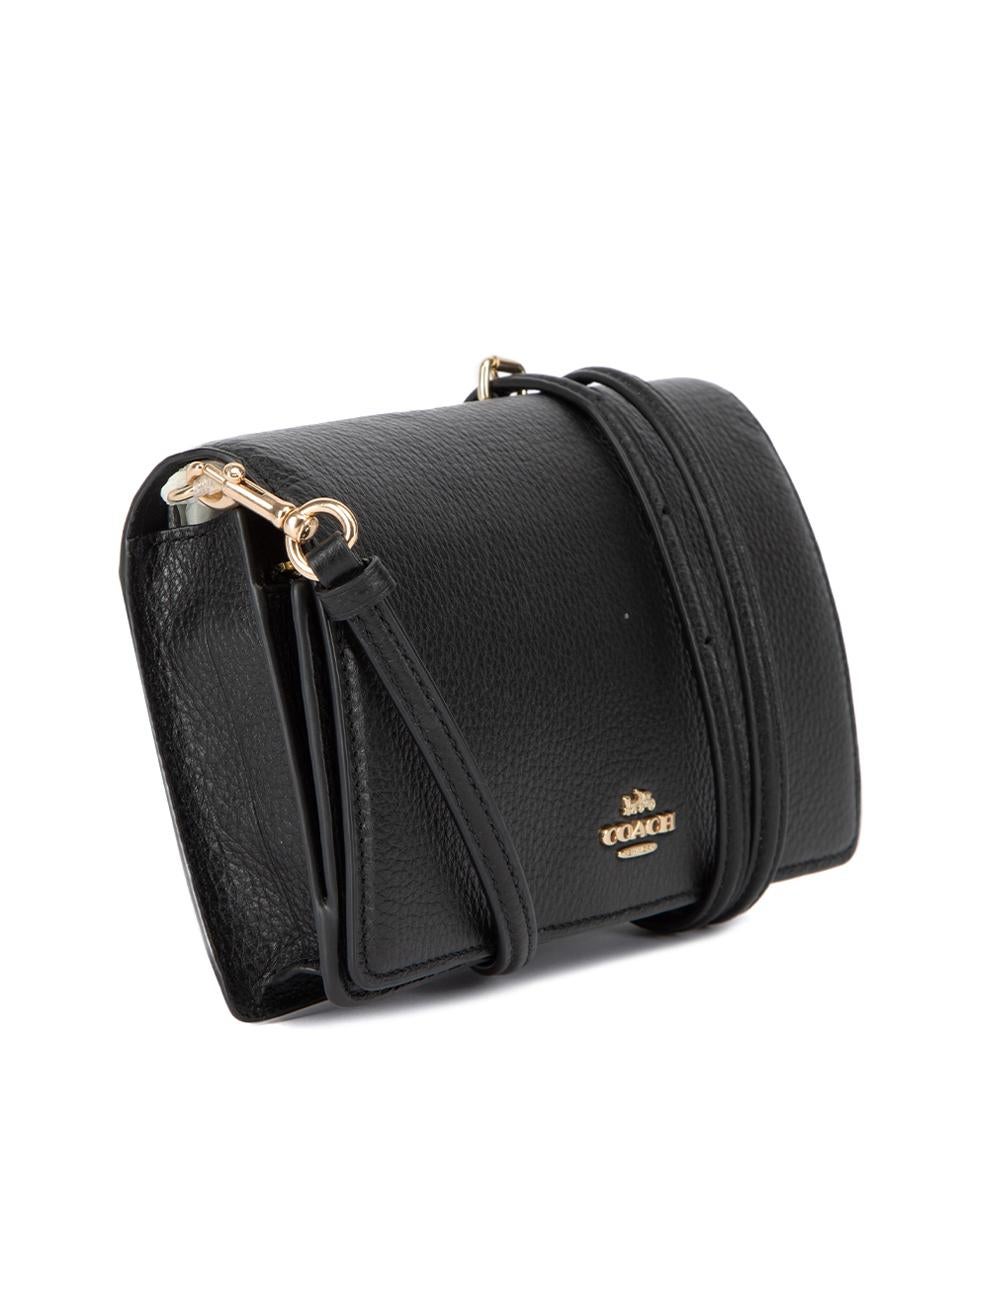 CONDITION is Never Worn. No visible wear to bag is evident on this used Coach designer resale item. Details Black Leather Crossbody clutch 1x Detachable and adjustable shoulder strap Front flap snap button closure Two main compartment 1x Zipped